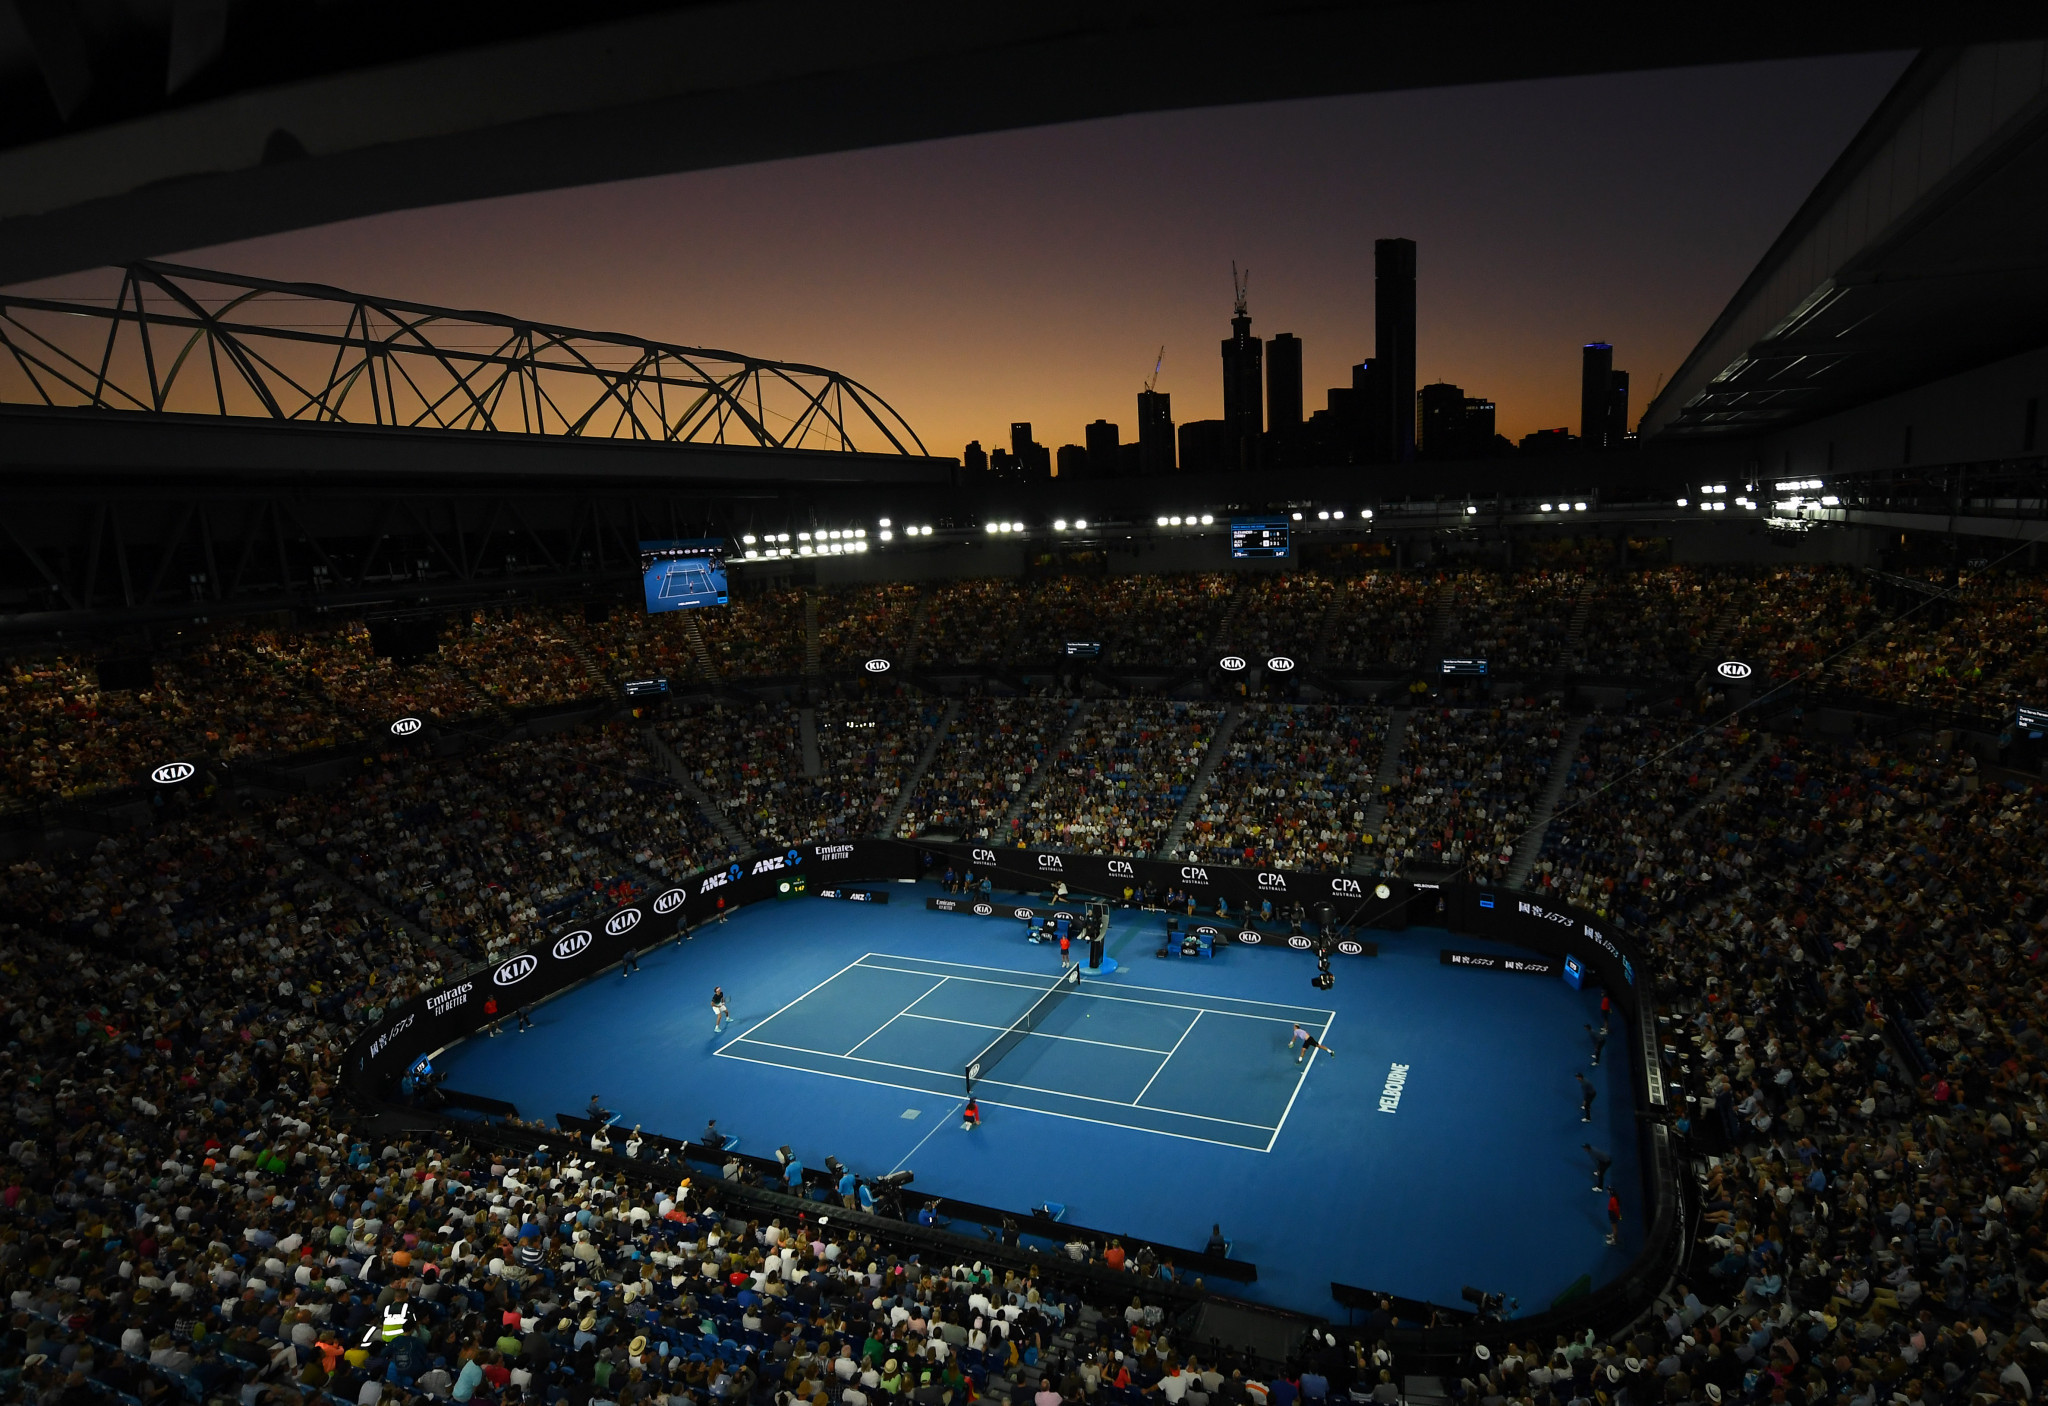 The crowd stayed late again as competition continued in Melbourne ©Getty Images